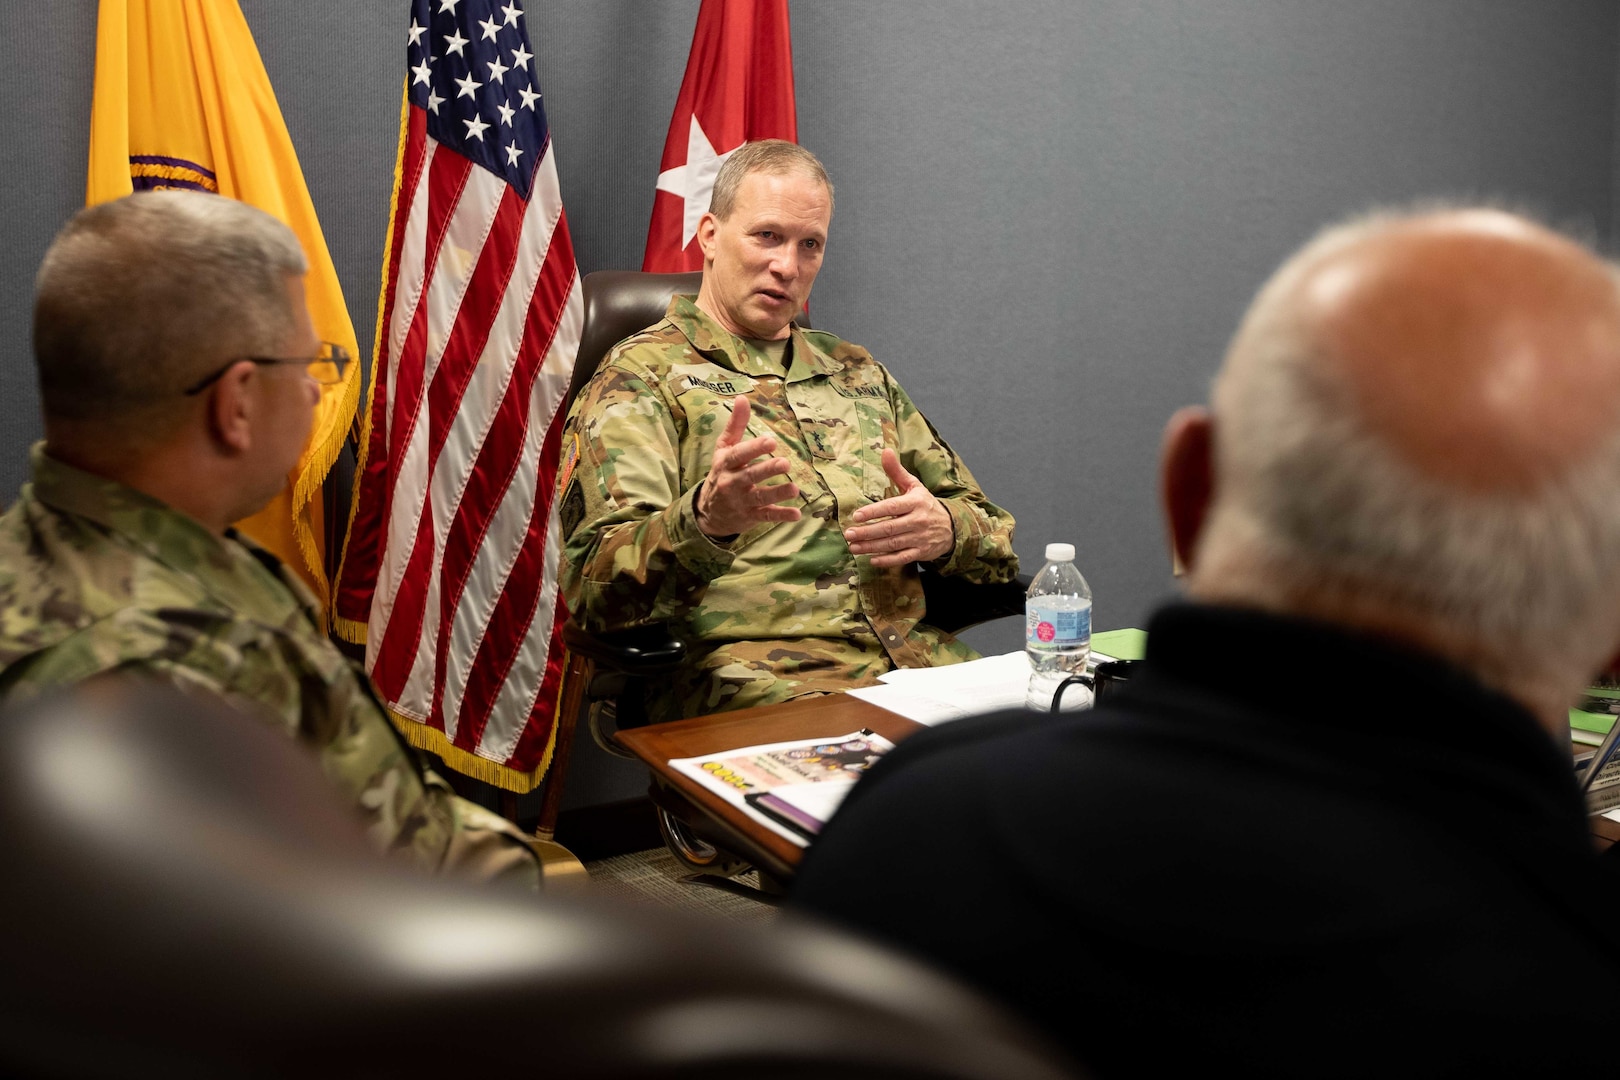 Army Maj. Gen. Greg Mosser, commanding general of the 377th Theater Sustainment Command, meets with Joint Task Force Civil Support (JTF-CS) Commanding General Army Maj. Gen. William “Bill” Hall and other department heads from the command during a recent visit to JTF-CS’s headquarters.